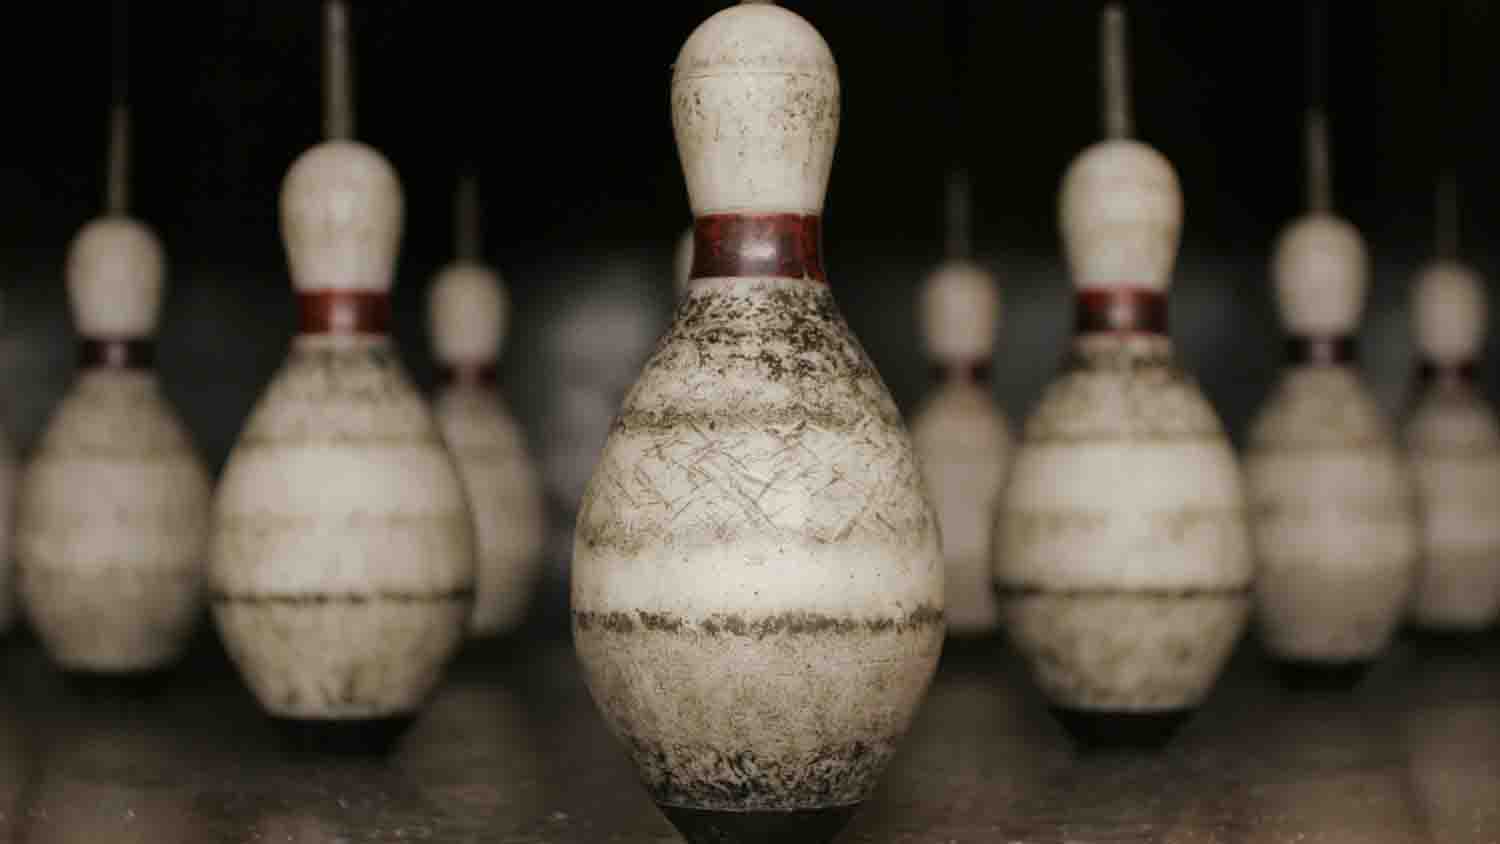 What Is Duckpin Bowling?